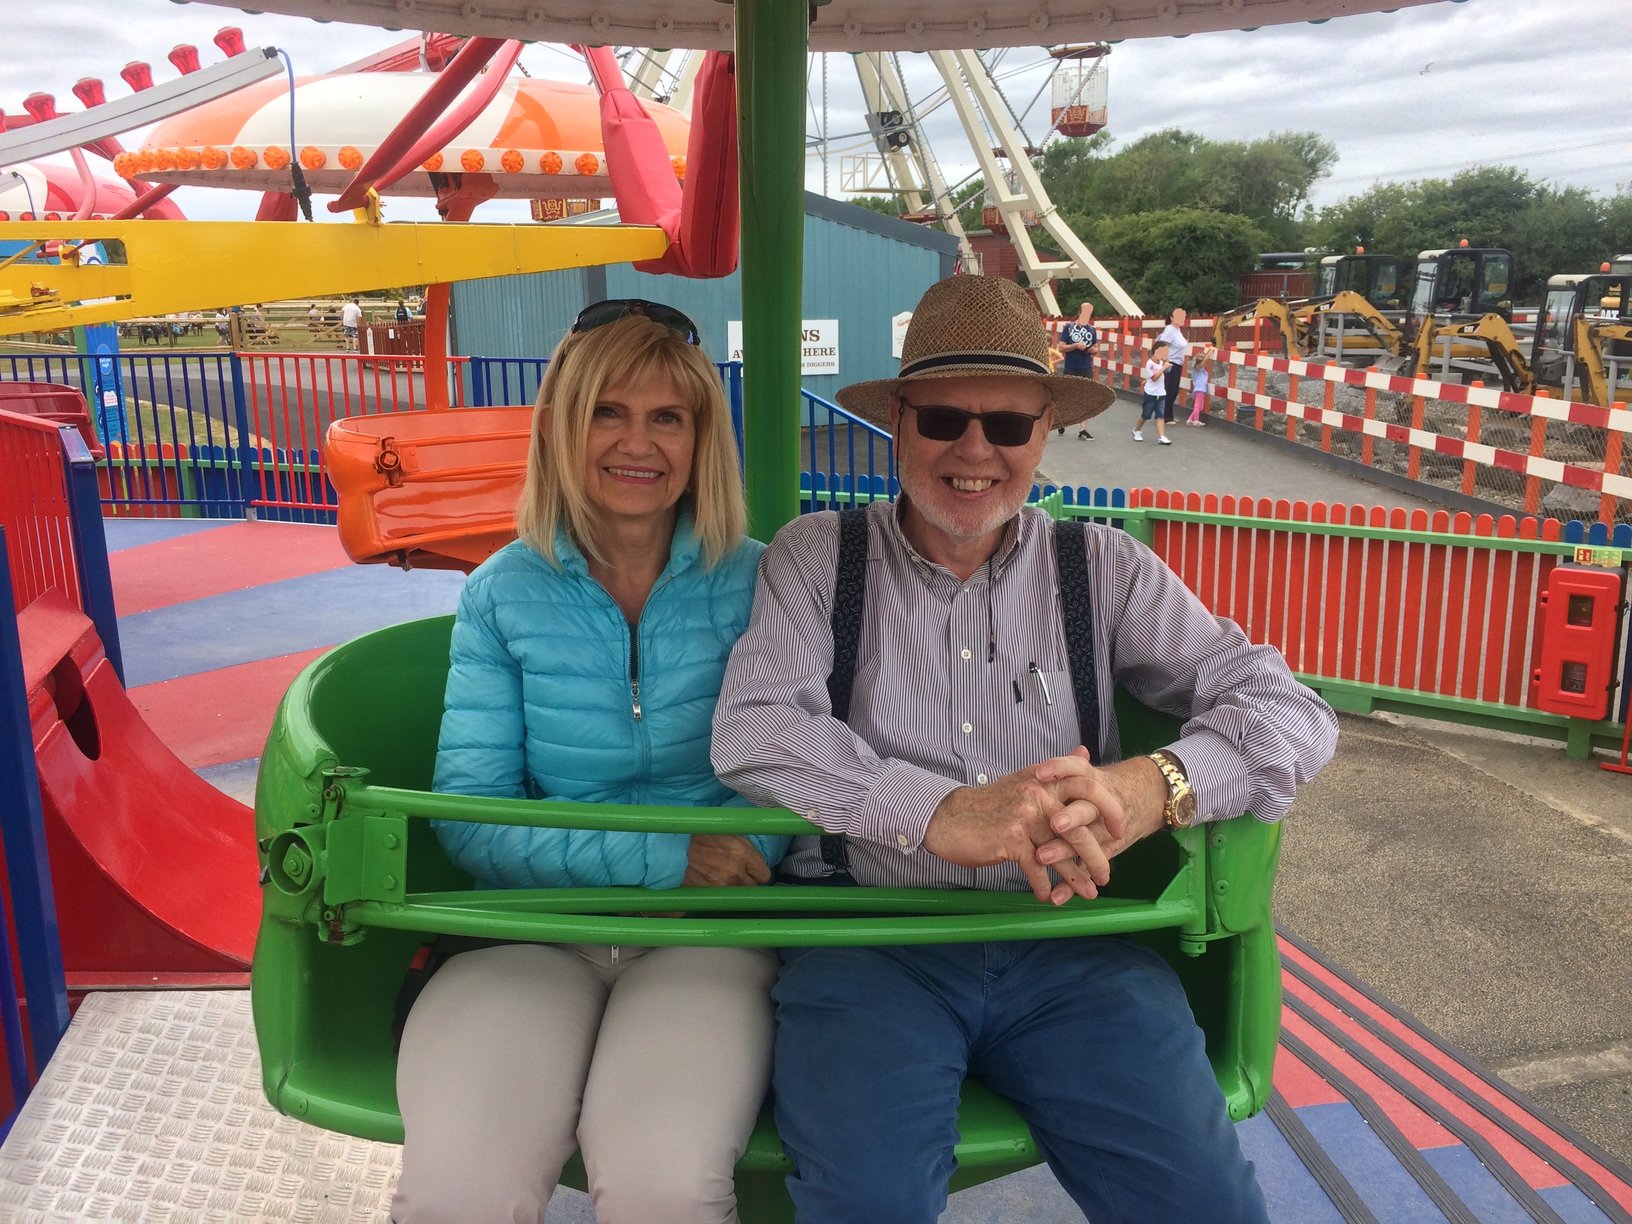 The directors of Folly Farm on The Paratrooper